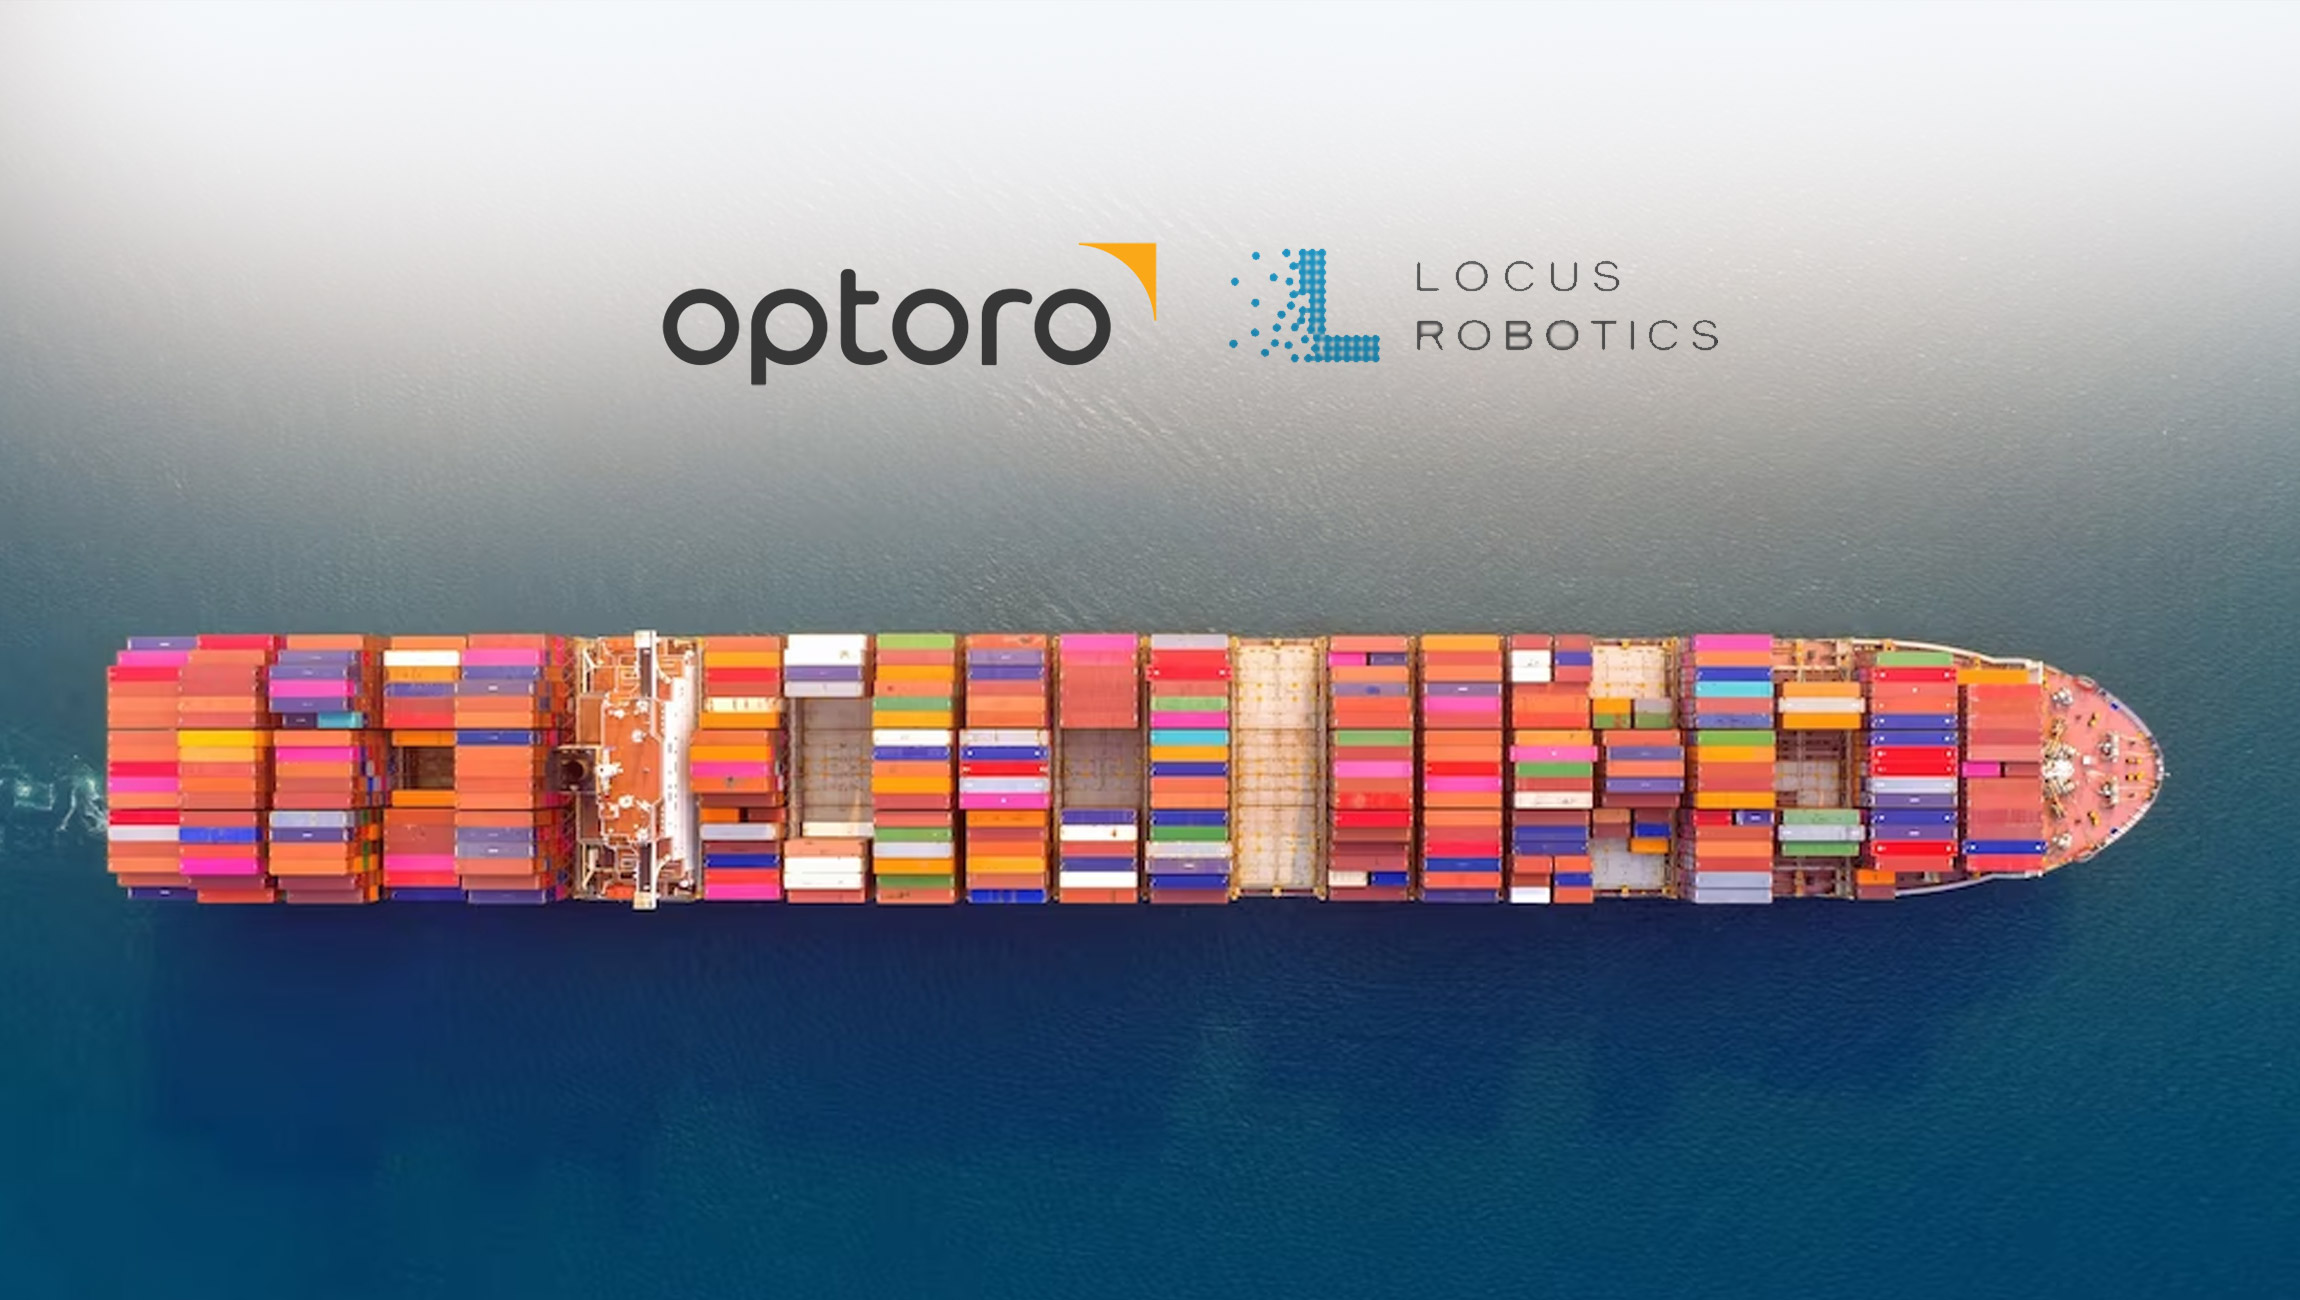 Optoro and Locus Robotics Team Up to Deliver Fully Integrated, High-Volume End-to-End Reverse Logistics Solution